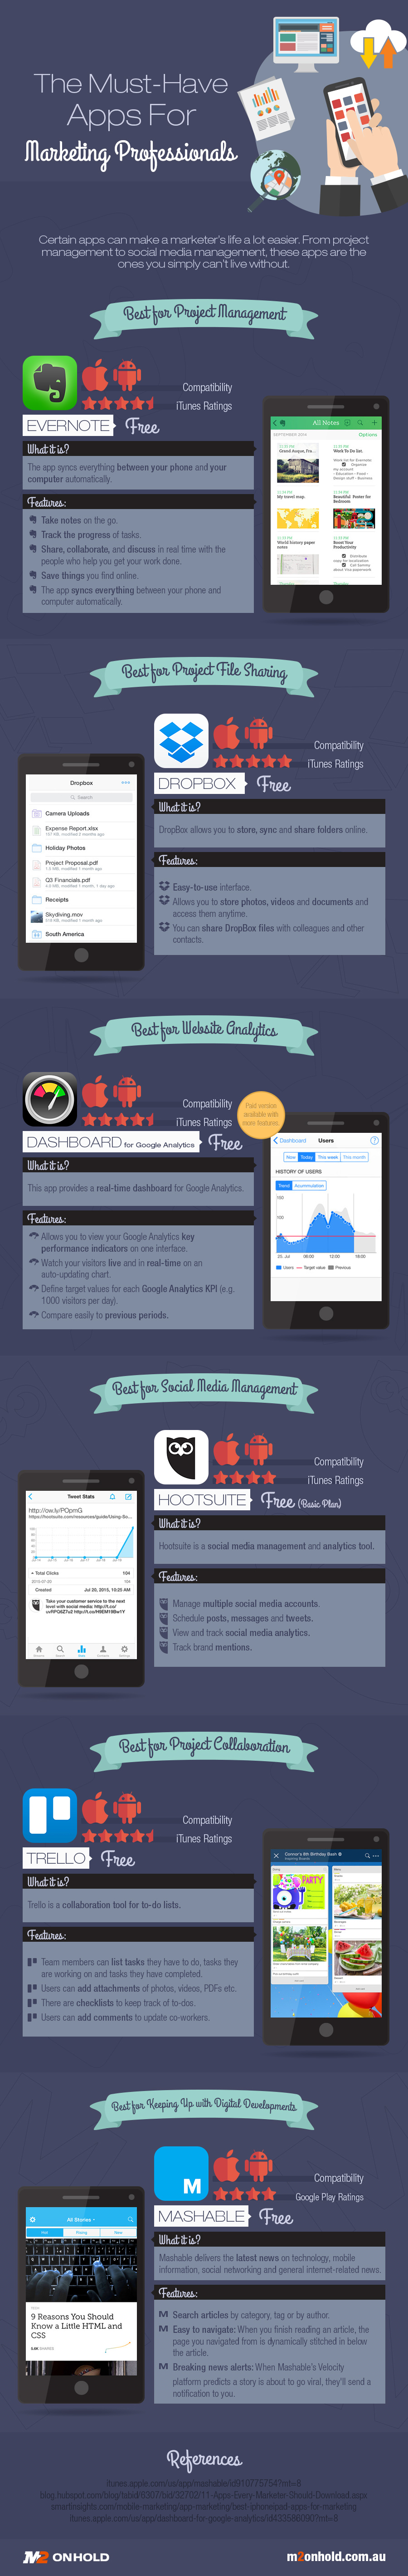 Must-Have-Apps-for-Marketing-Professionals-Infographic